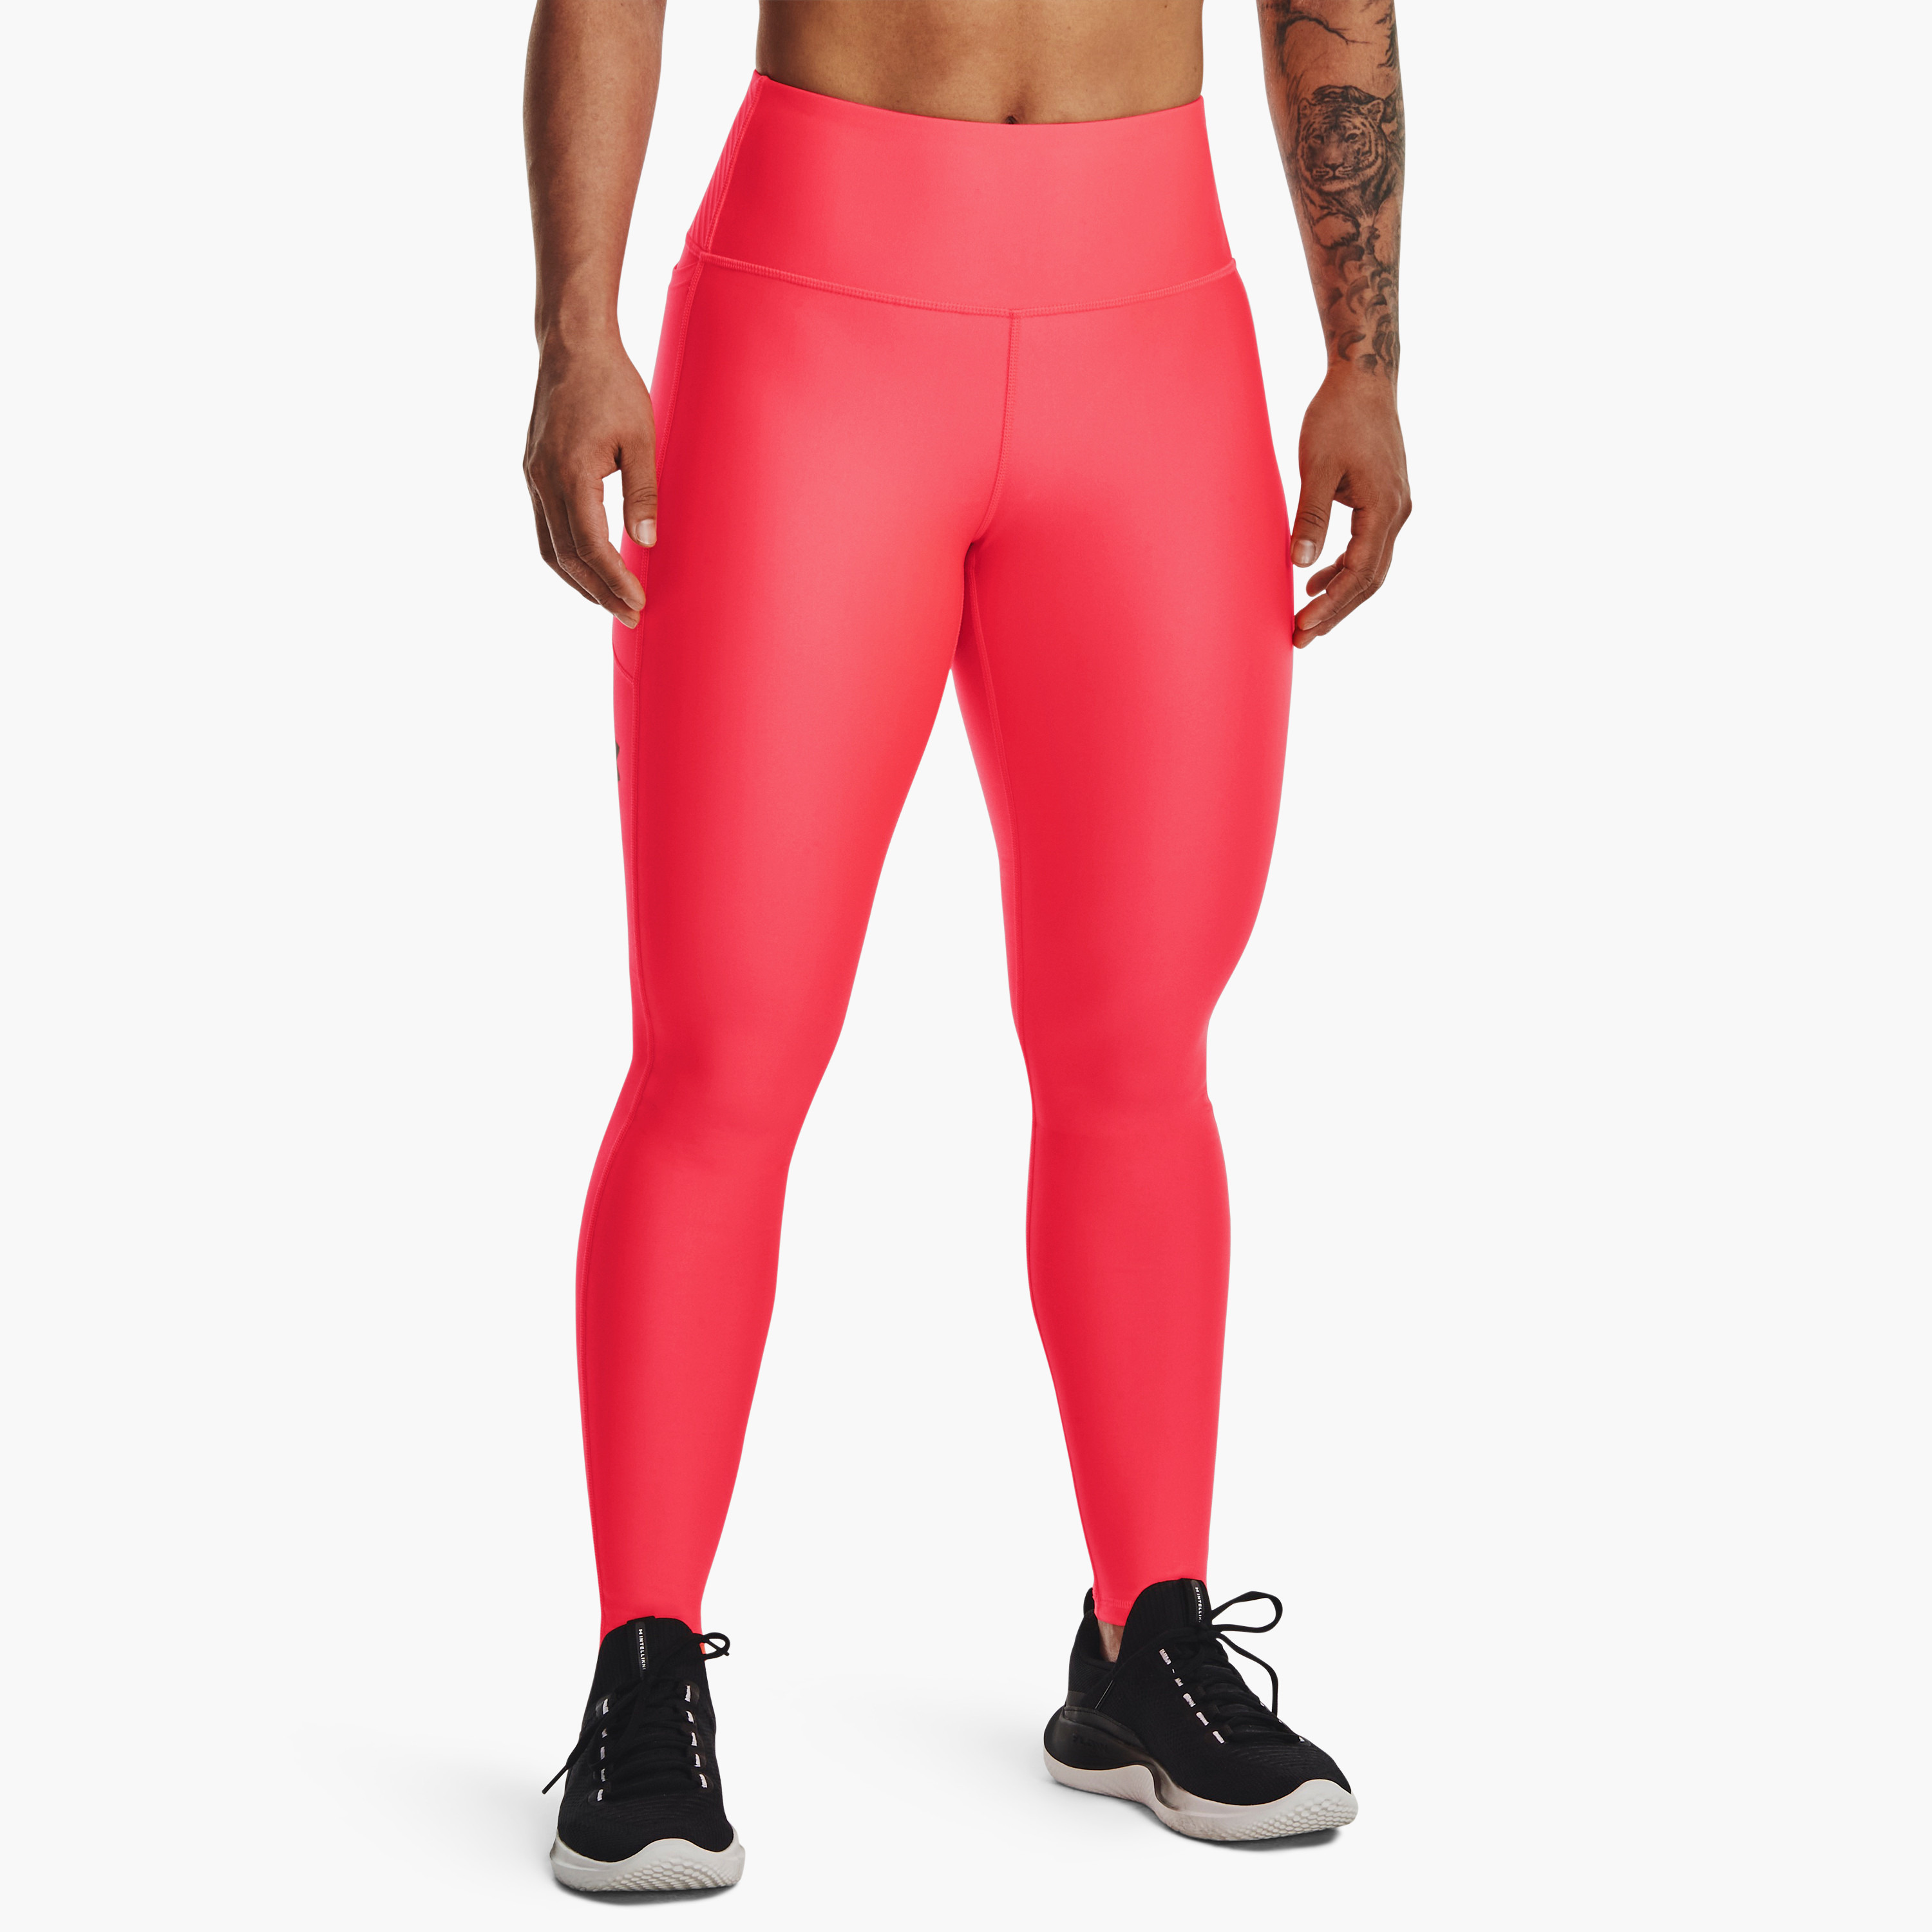 Dropship Brand Yoga Pants Hidden Pockets At Waist Fitness Sports Leggings  Women Sportswear Stretchy Pants Gym Push Up Workout Clothing to Sell Online  at a Lower Price | Doba